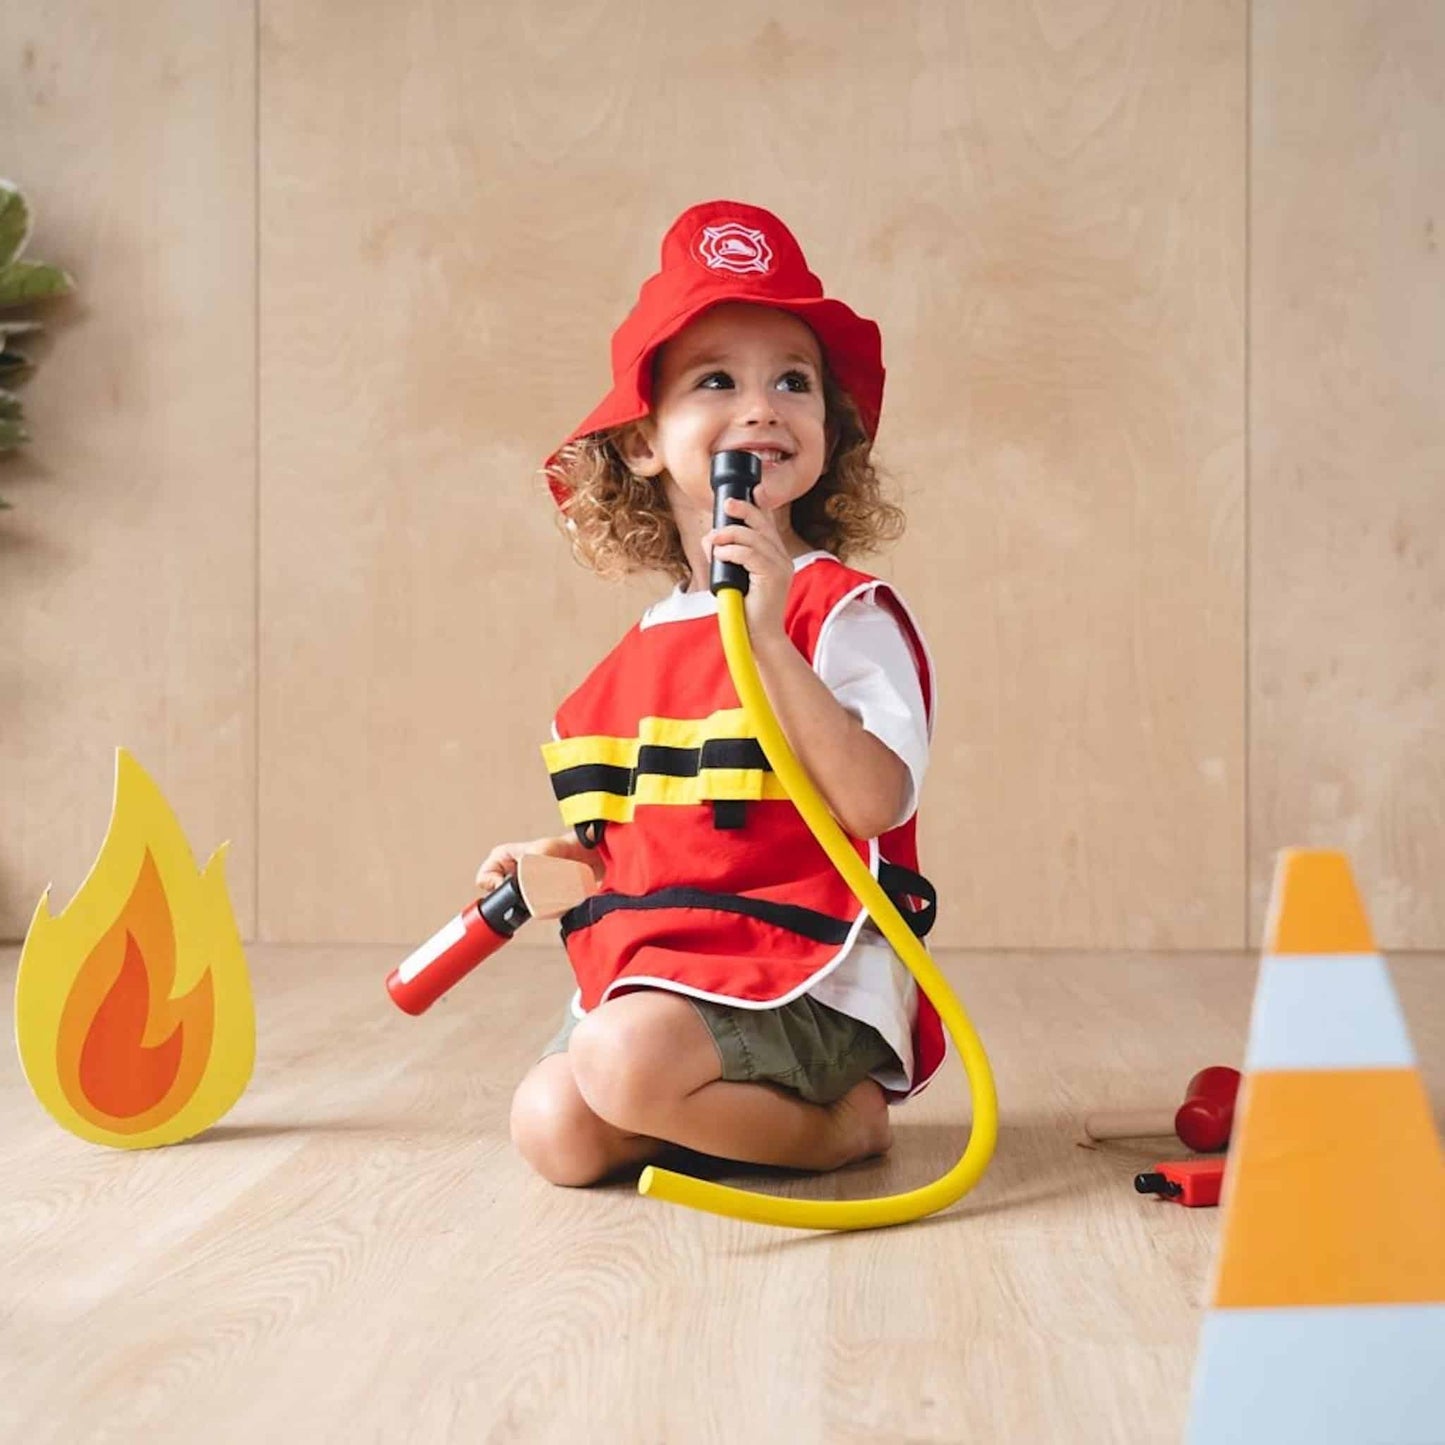 Plan Toys Fire Fighter Play Set Playing